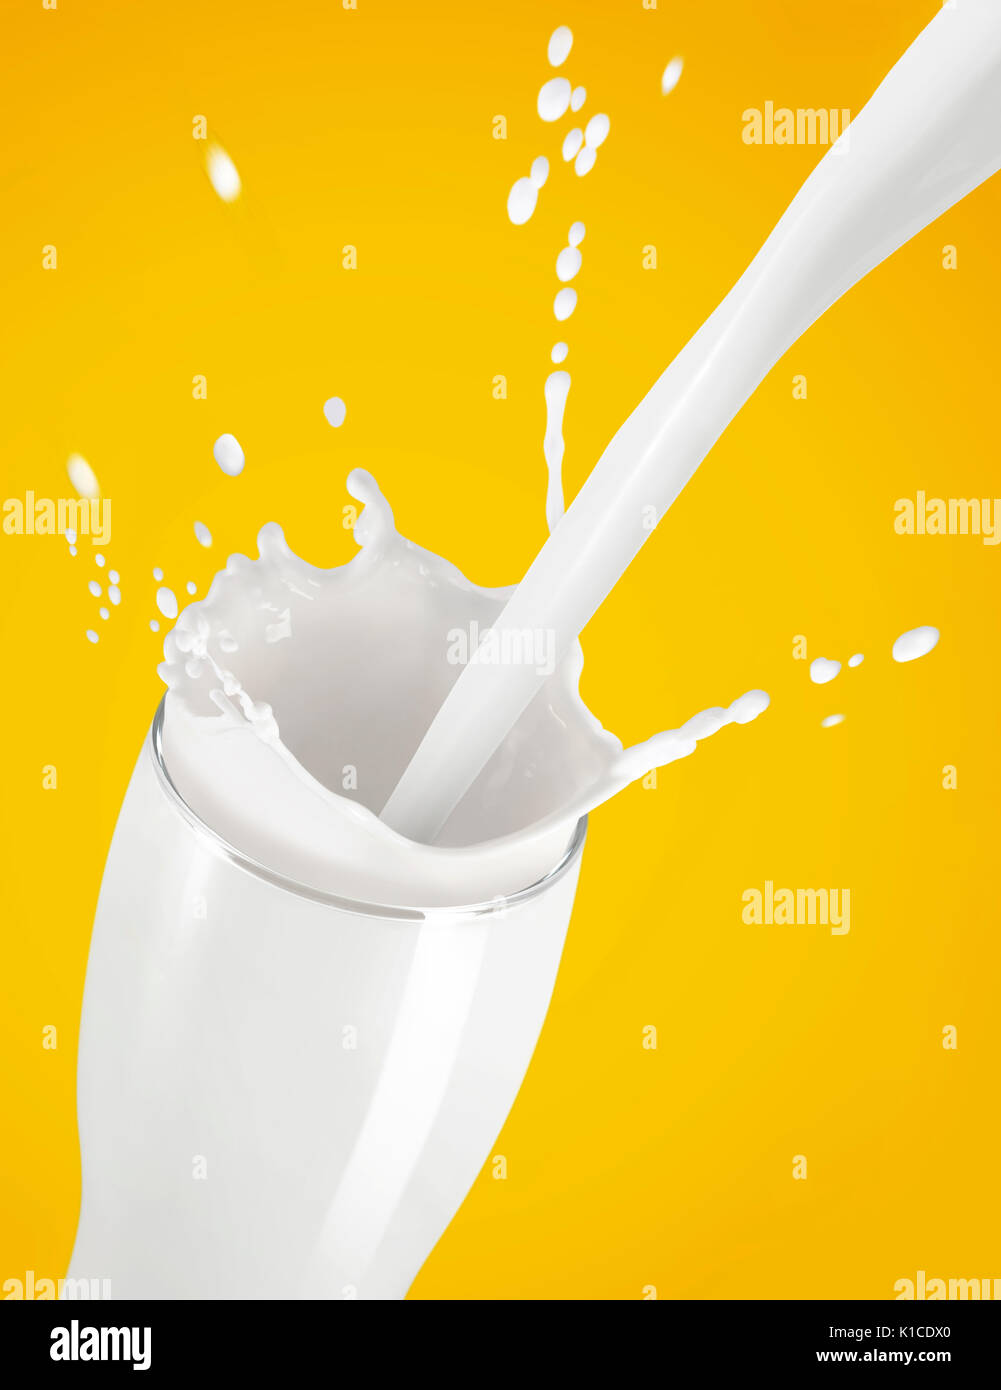 Download Milk Splash In Glass Over Yellow Background Stock Photo Alamy Yellowimages Mockups